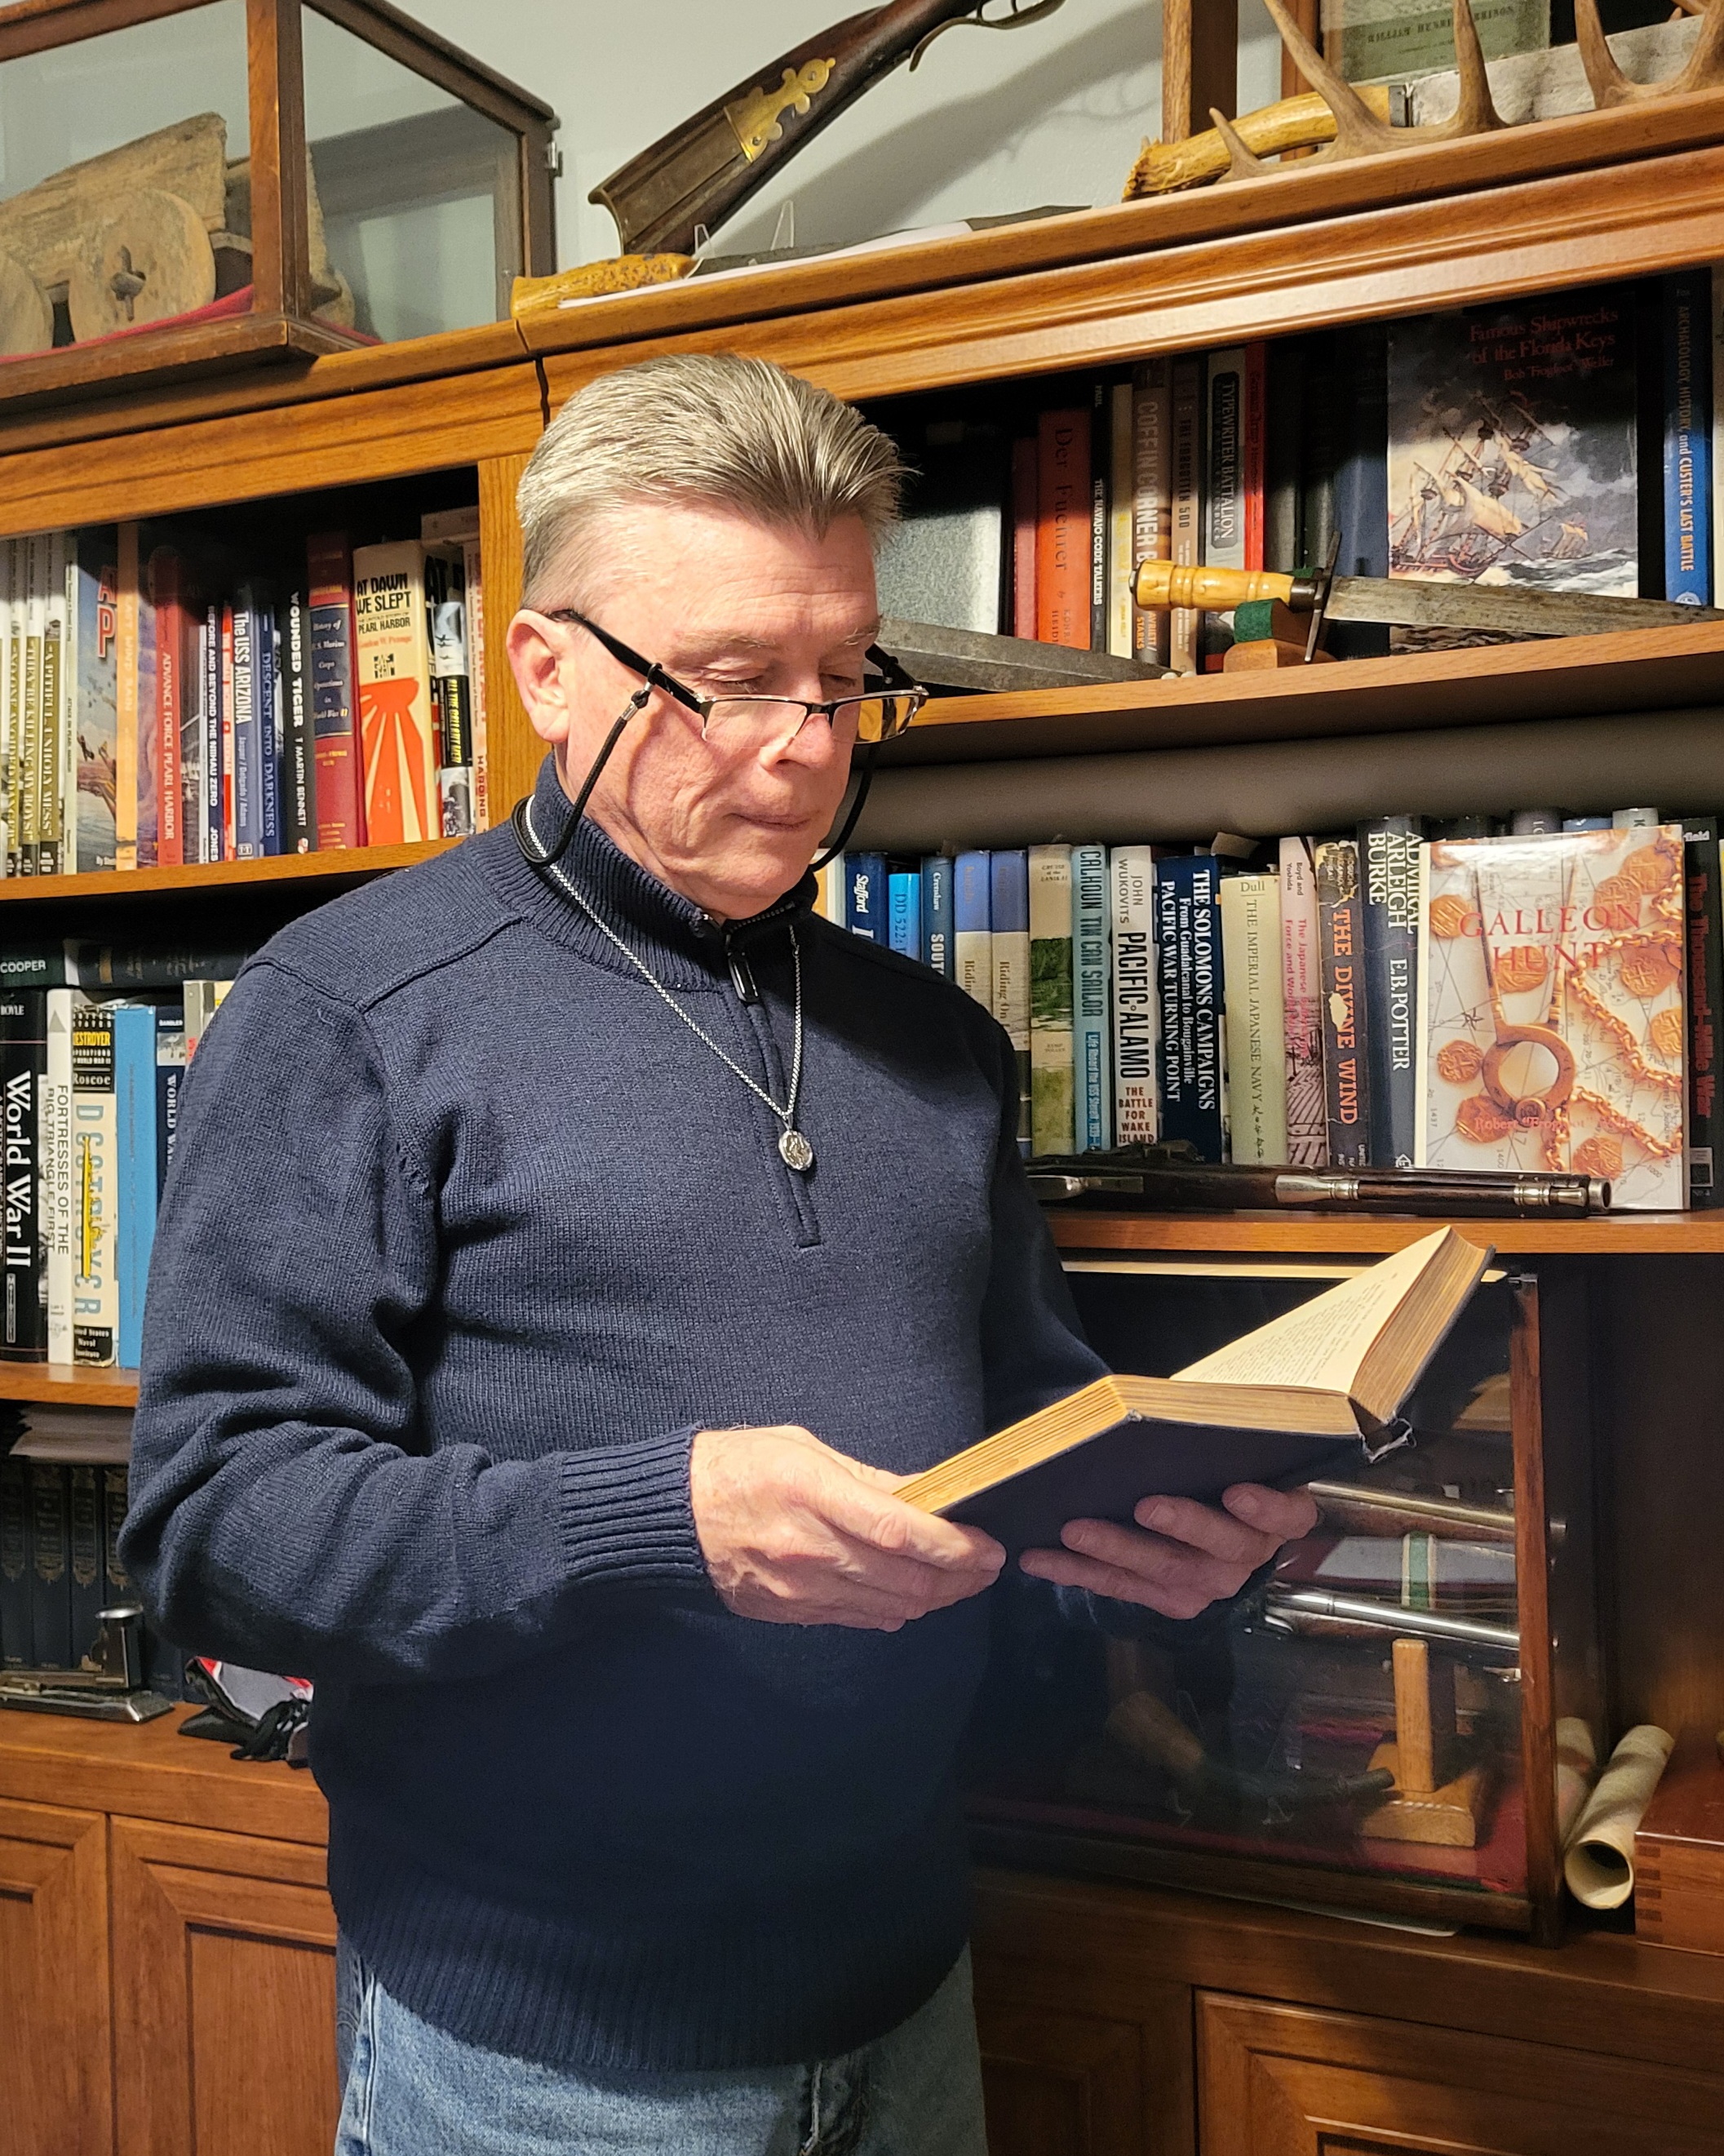 Knight standing with a studied look into the pages of a book in his library with full bookshelves and some historical artifacts in the background